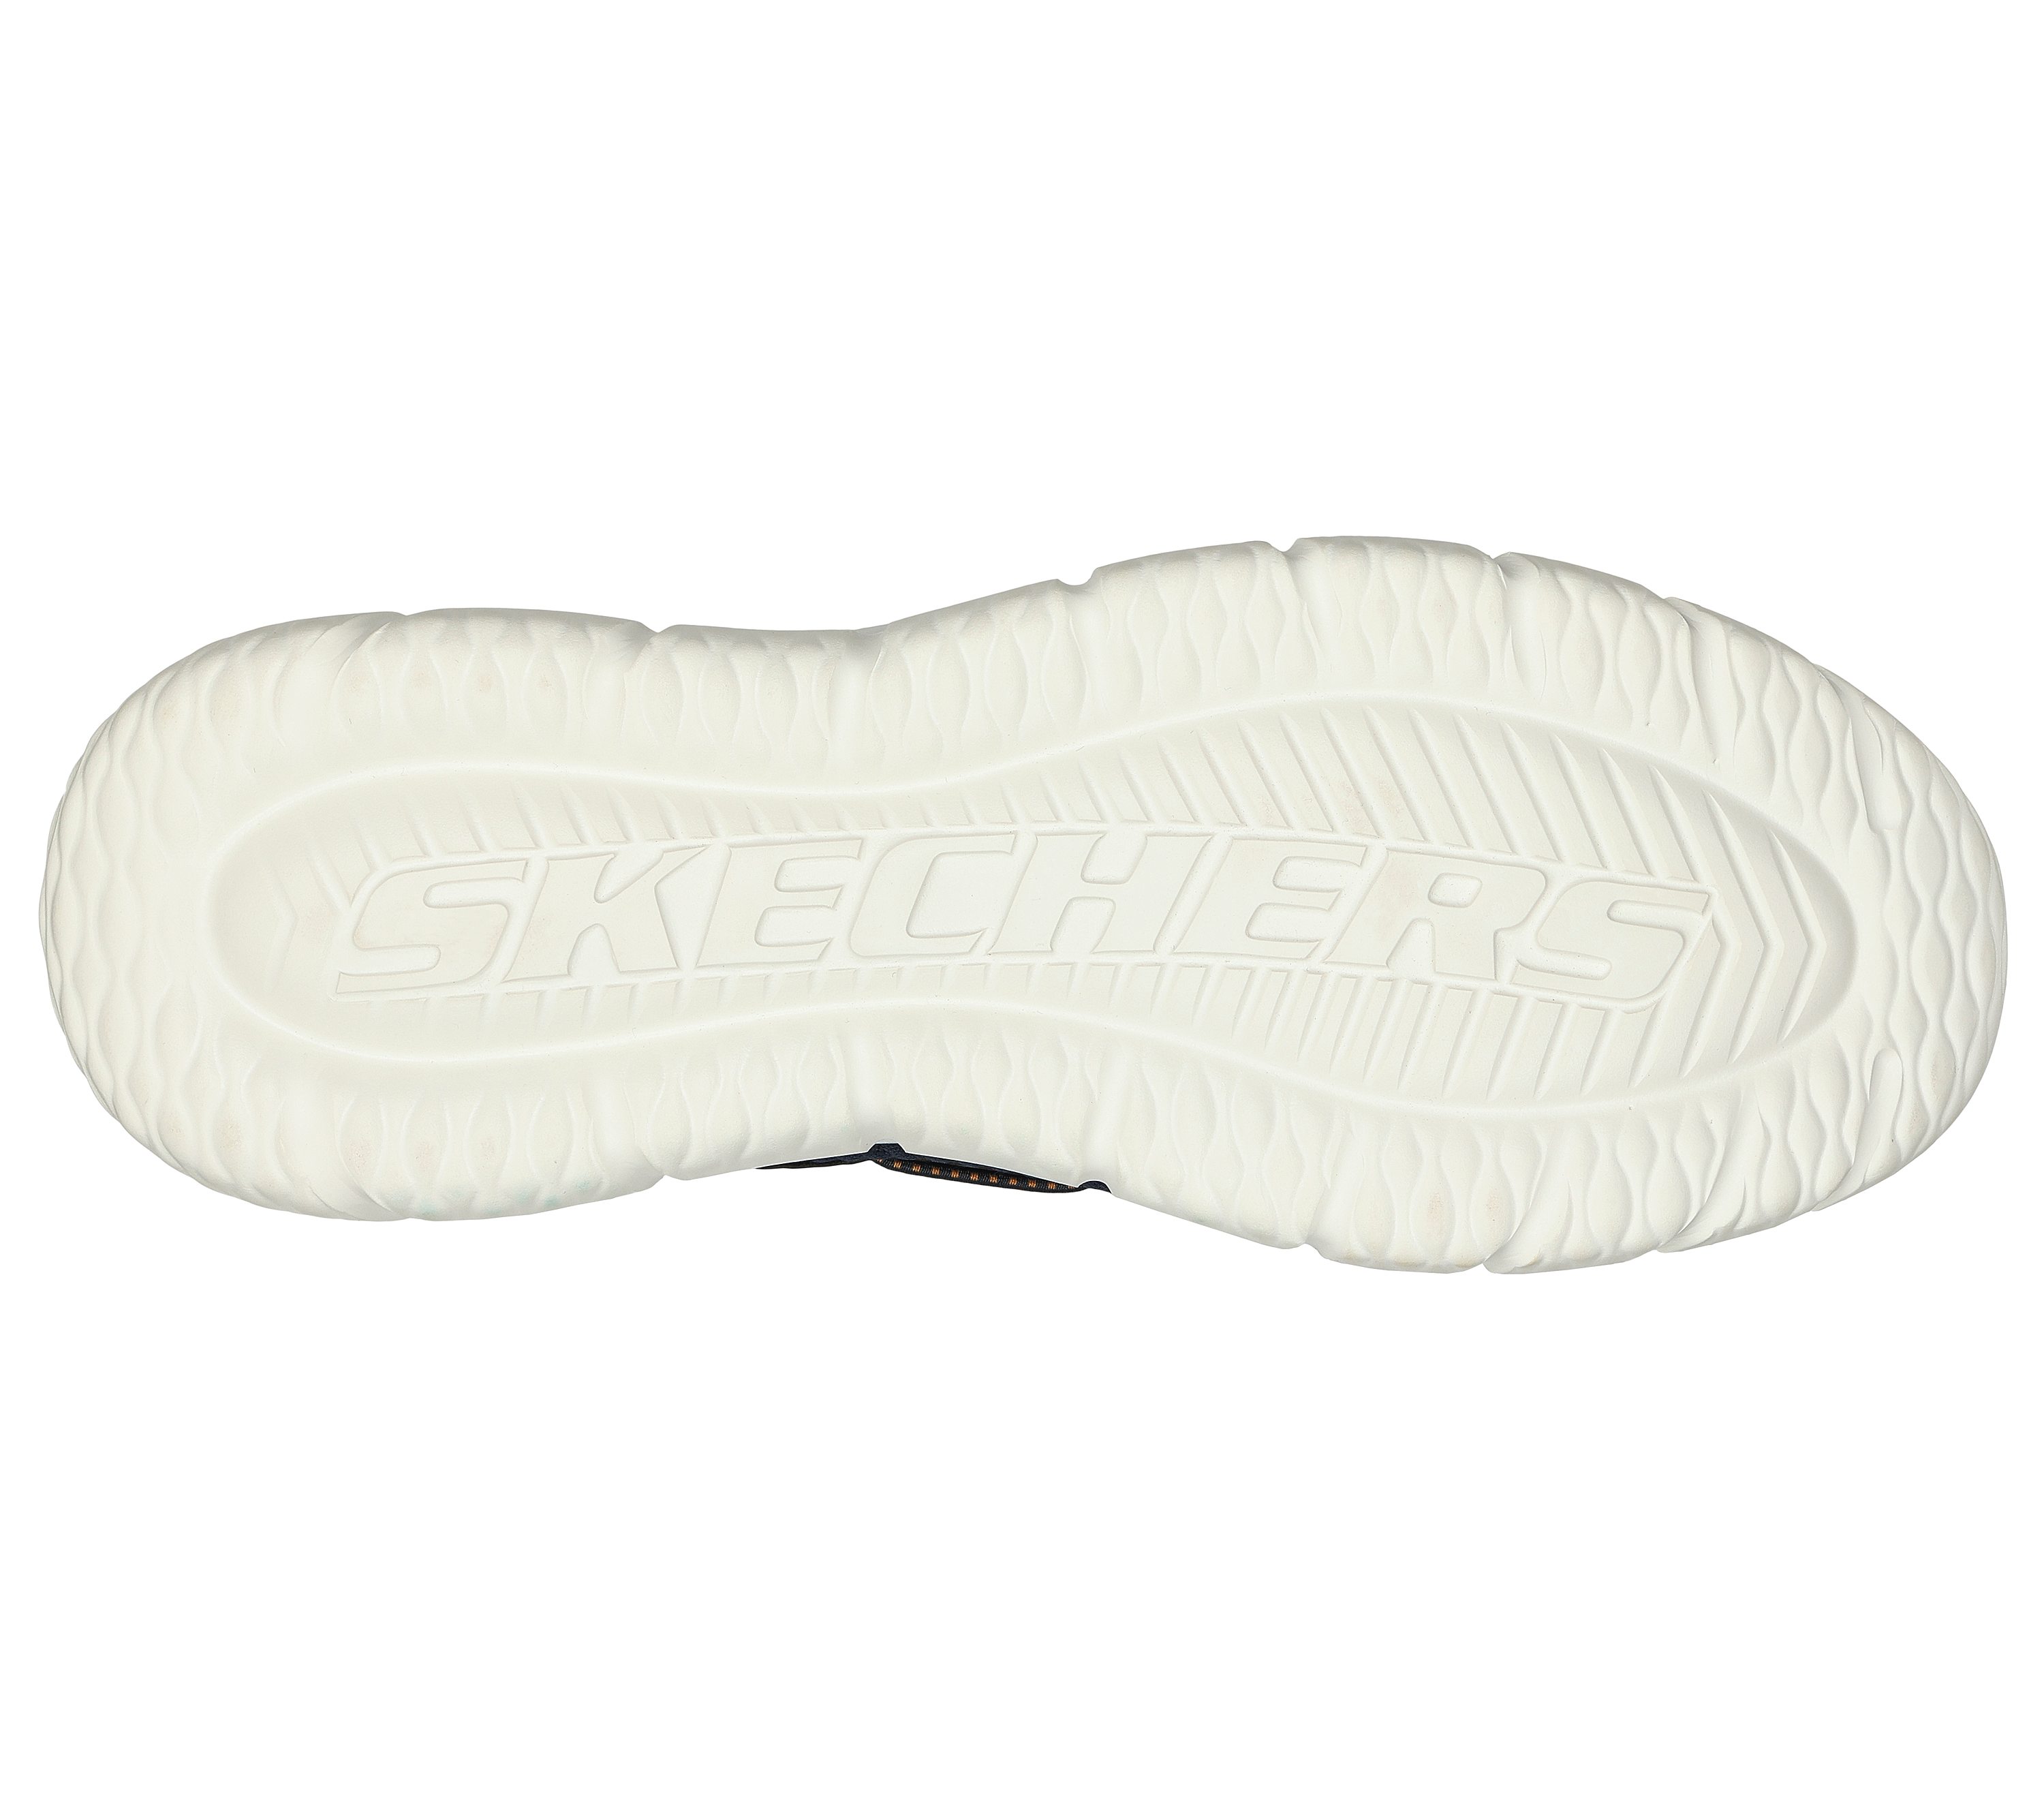 The Skechers D'Lites Goes Chunkier With The D'Lites 3.0 – Clavel Magazine